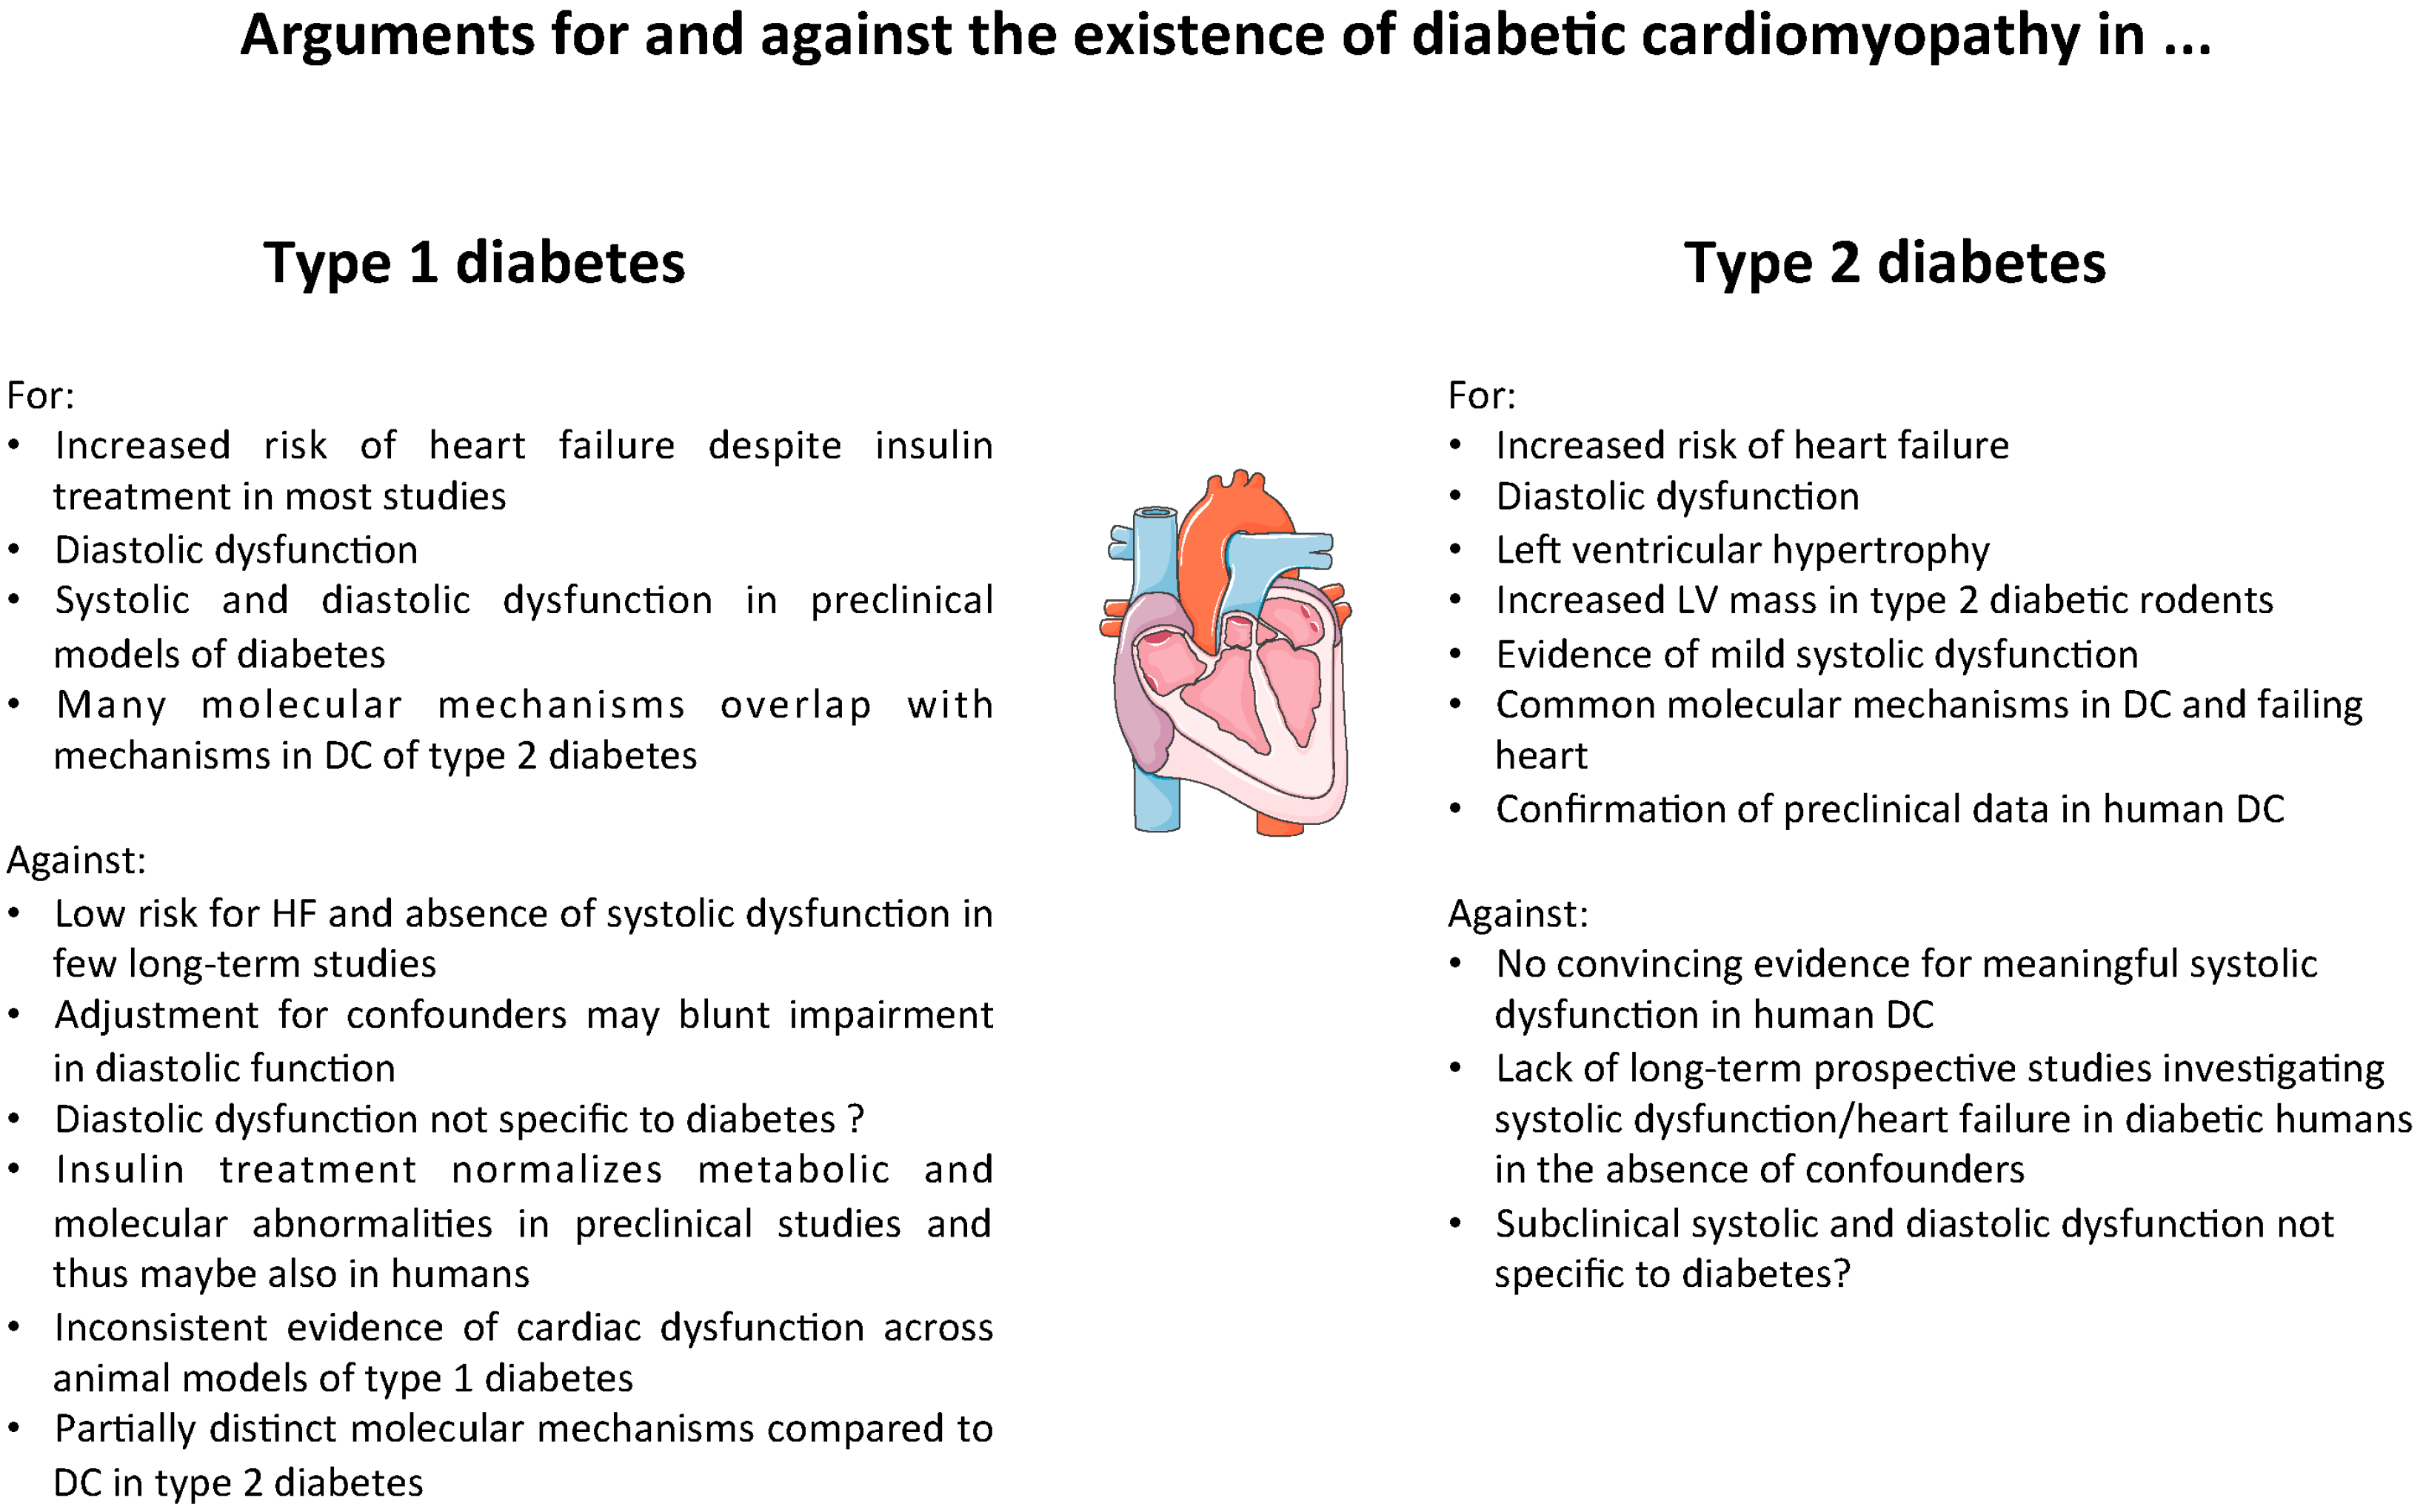 Arguments for and against. Diabetic cardiomyopathy. Against перевод.